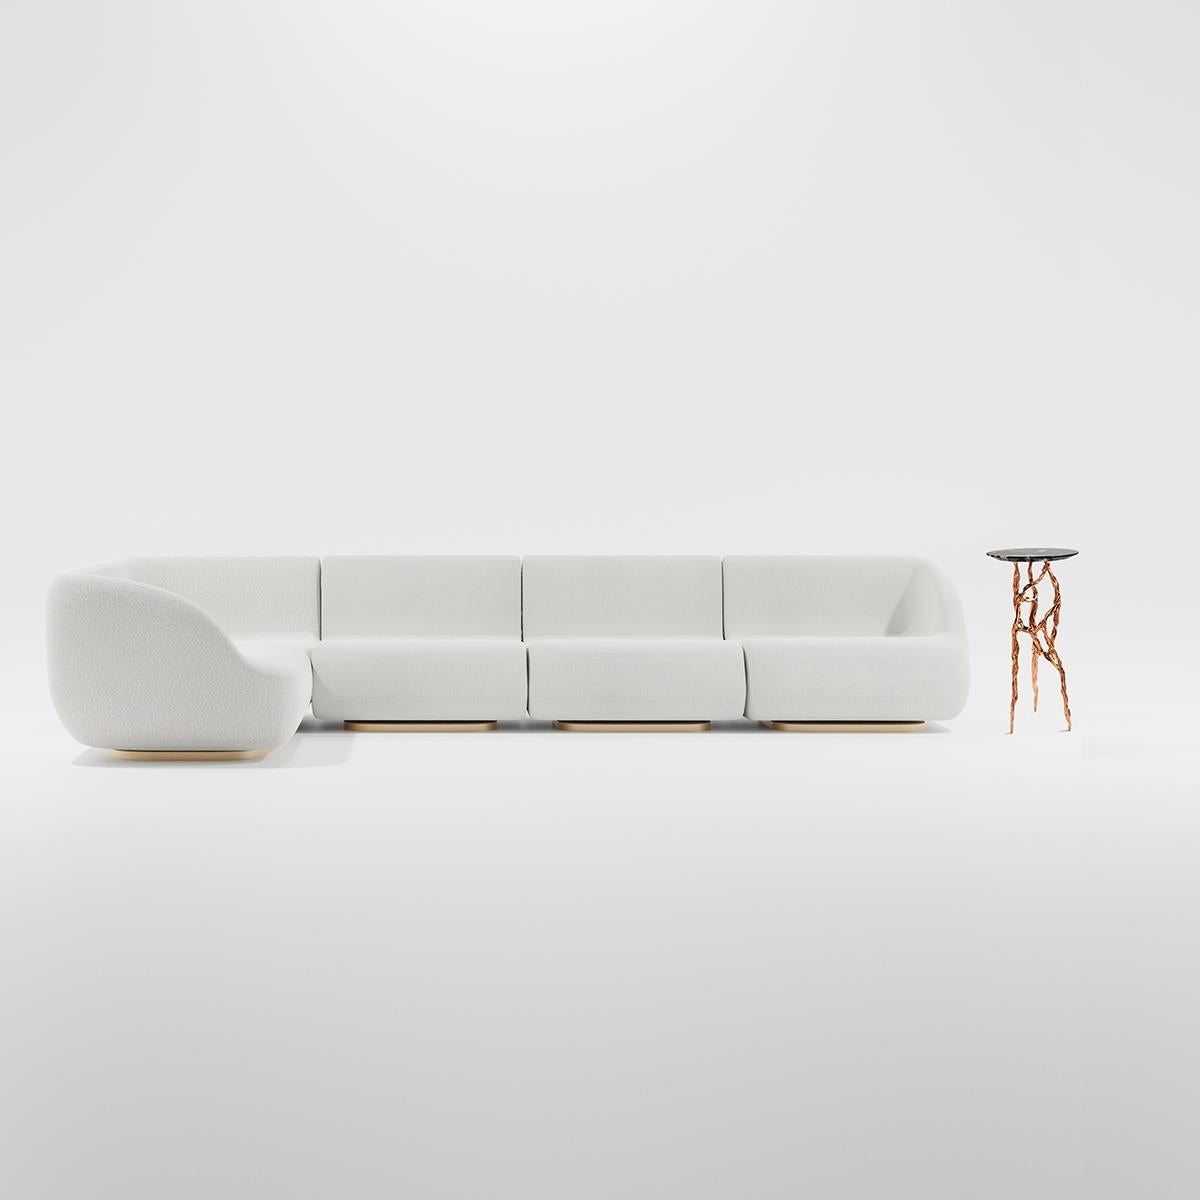 Four primary elements, each with an independent hand patinated brass base, combine to create a Classic L shaped design. The side element detaches and functions as an meridian chaise lounge. Alternative configurations - u and straight, as well as